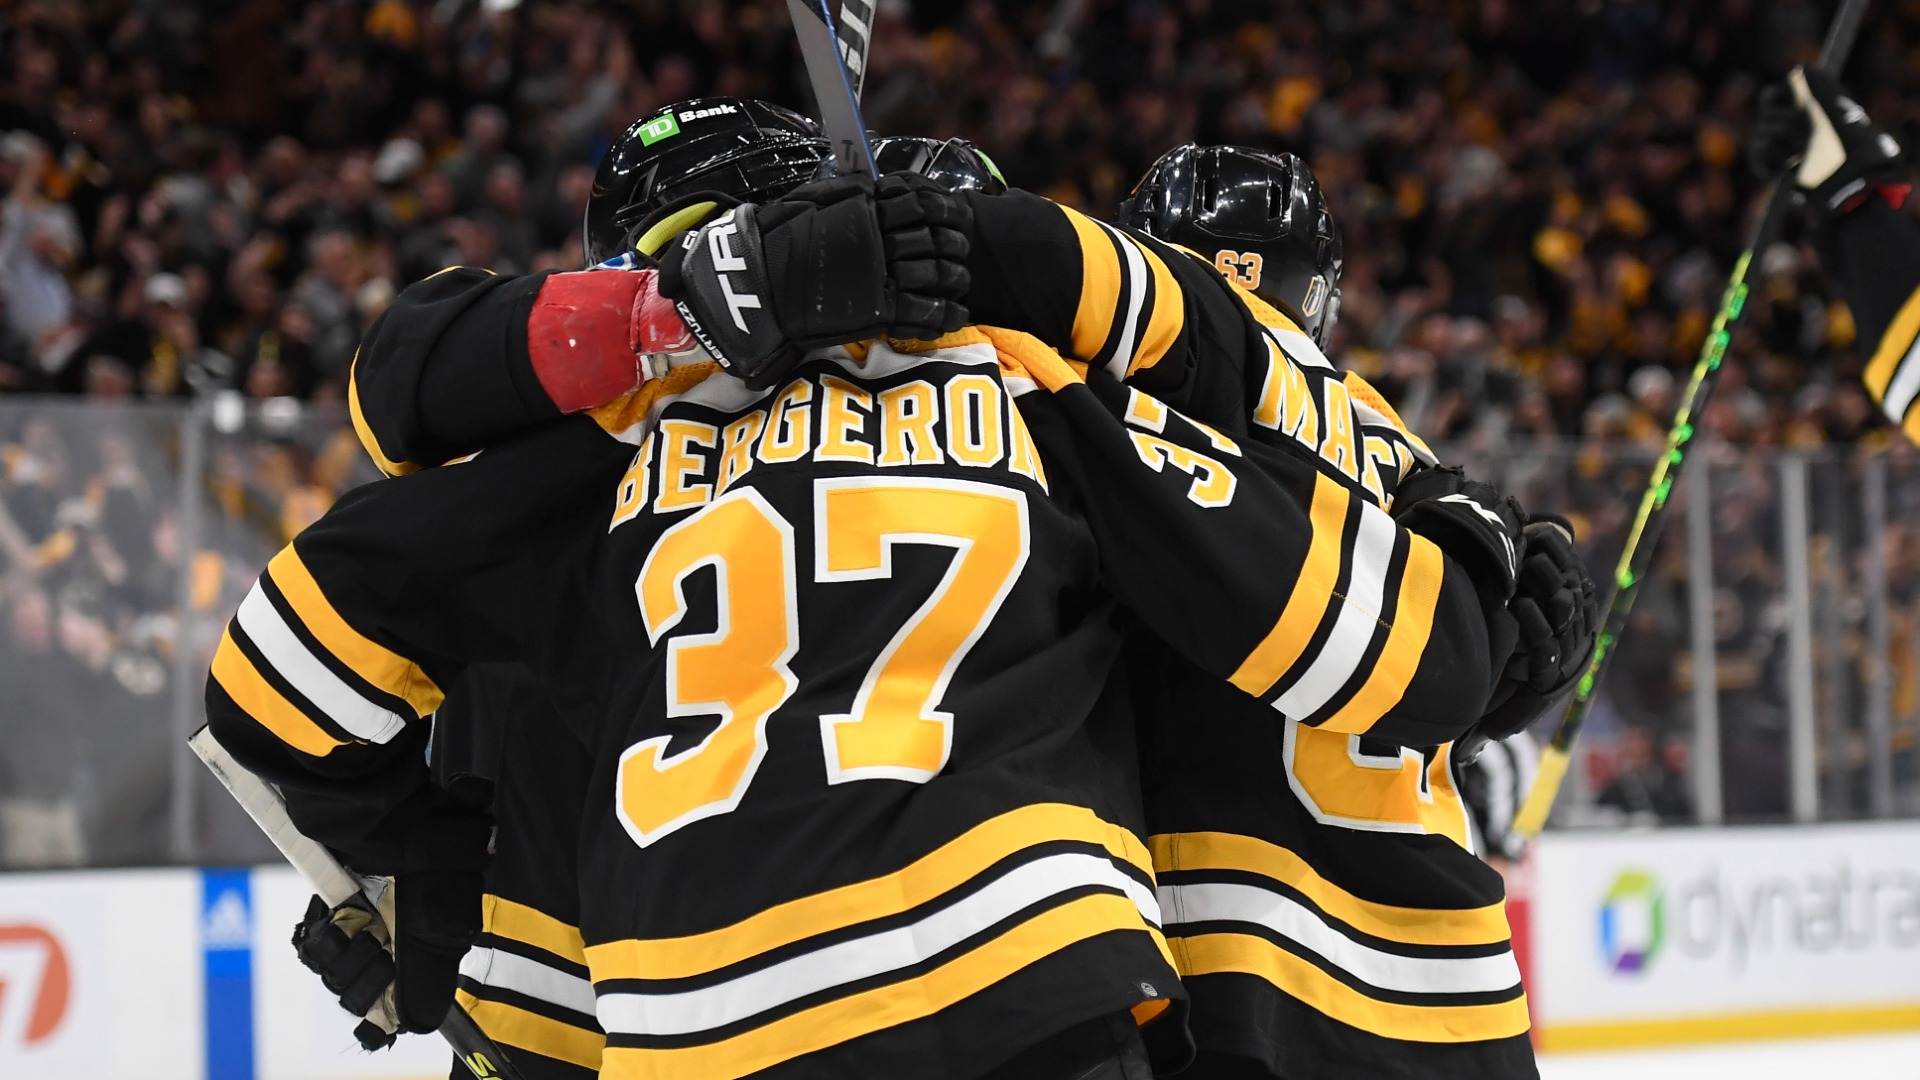 Boston's Patrice Bergeron gets back on the ice